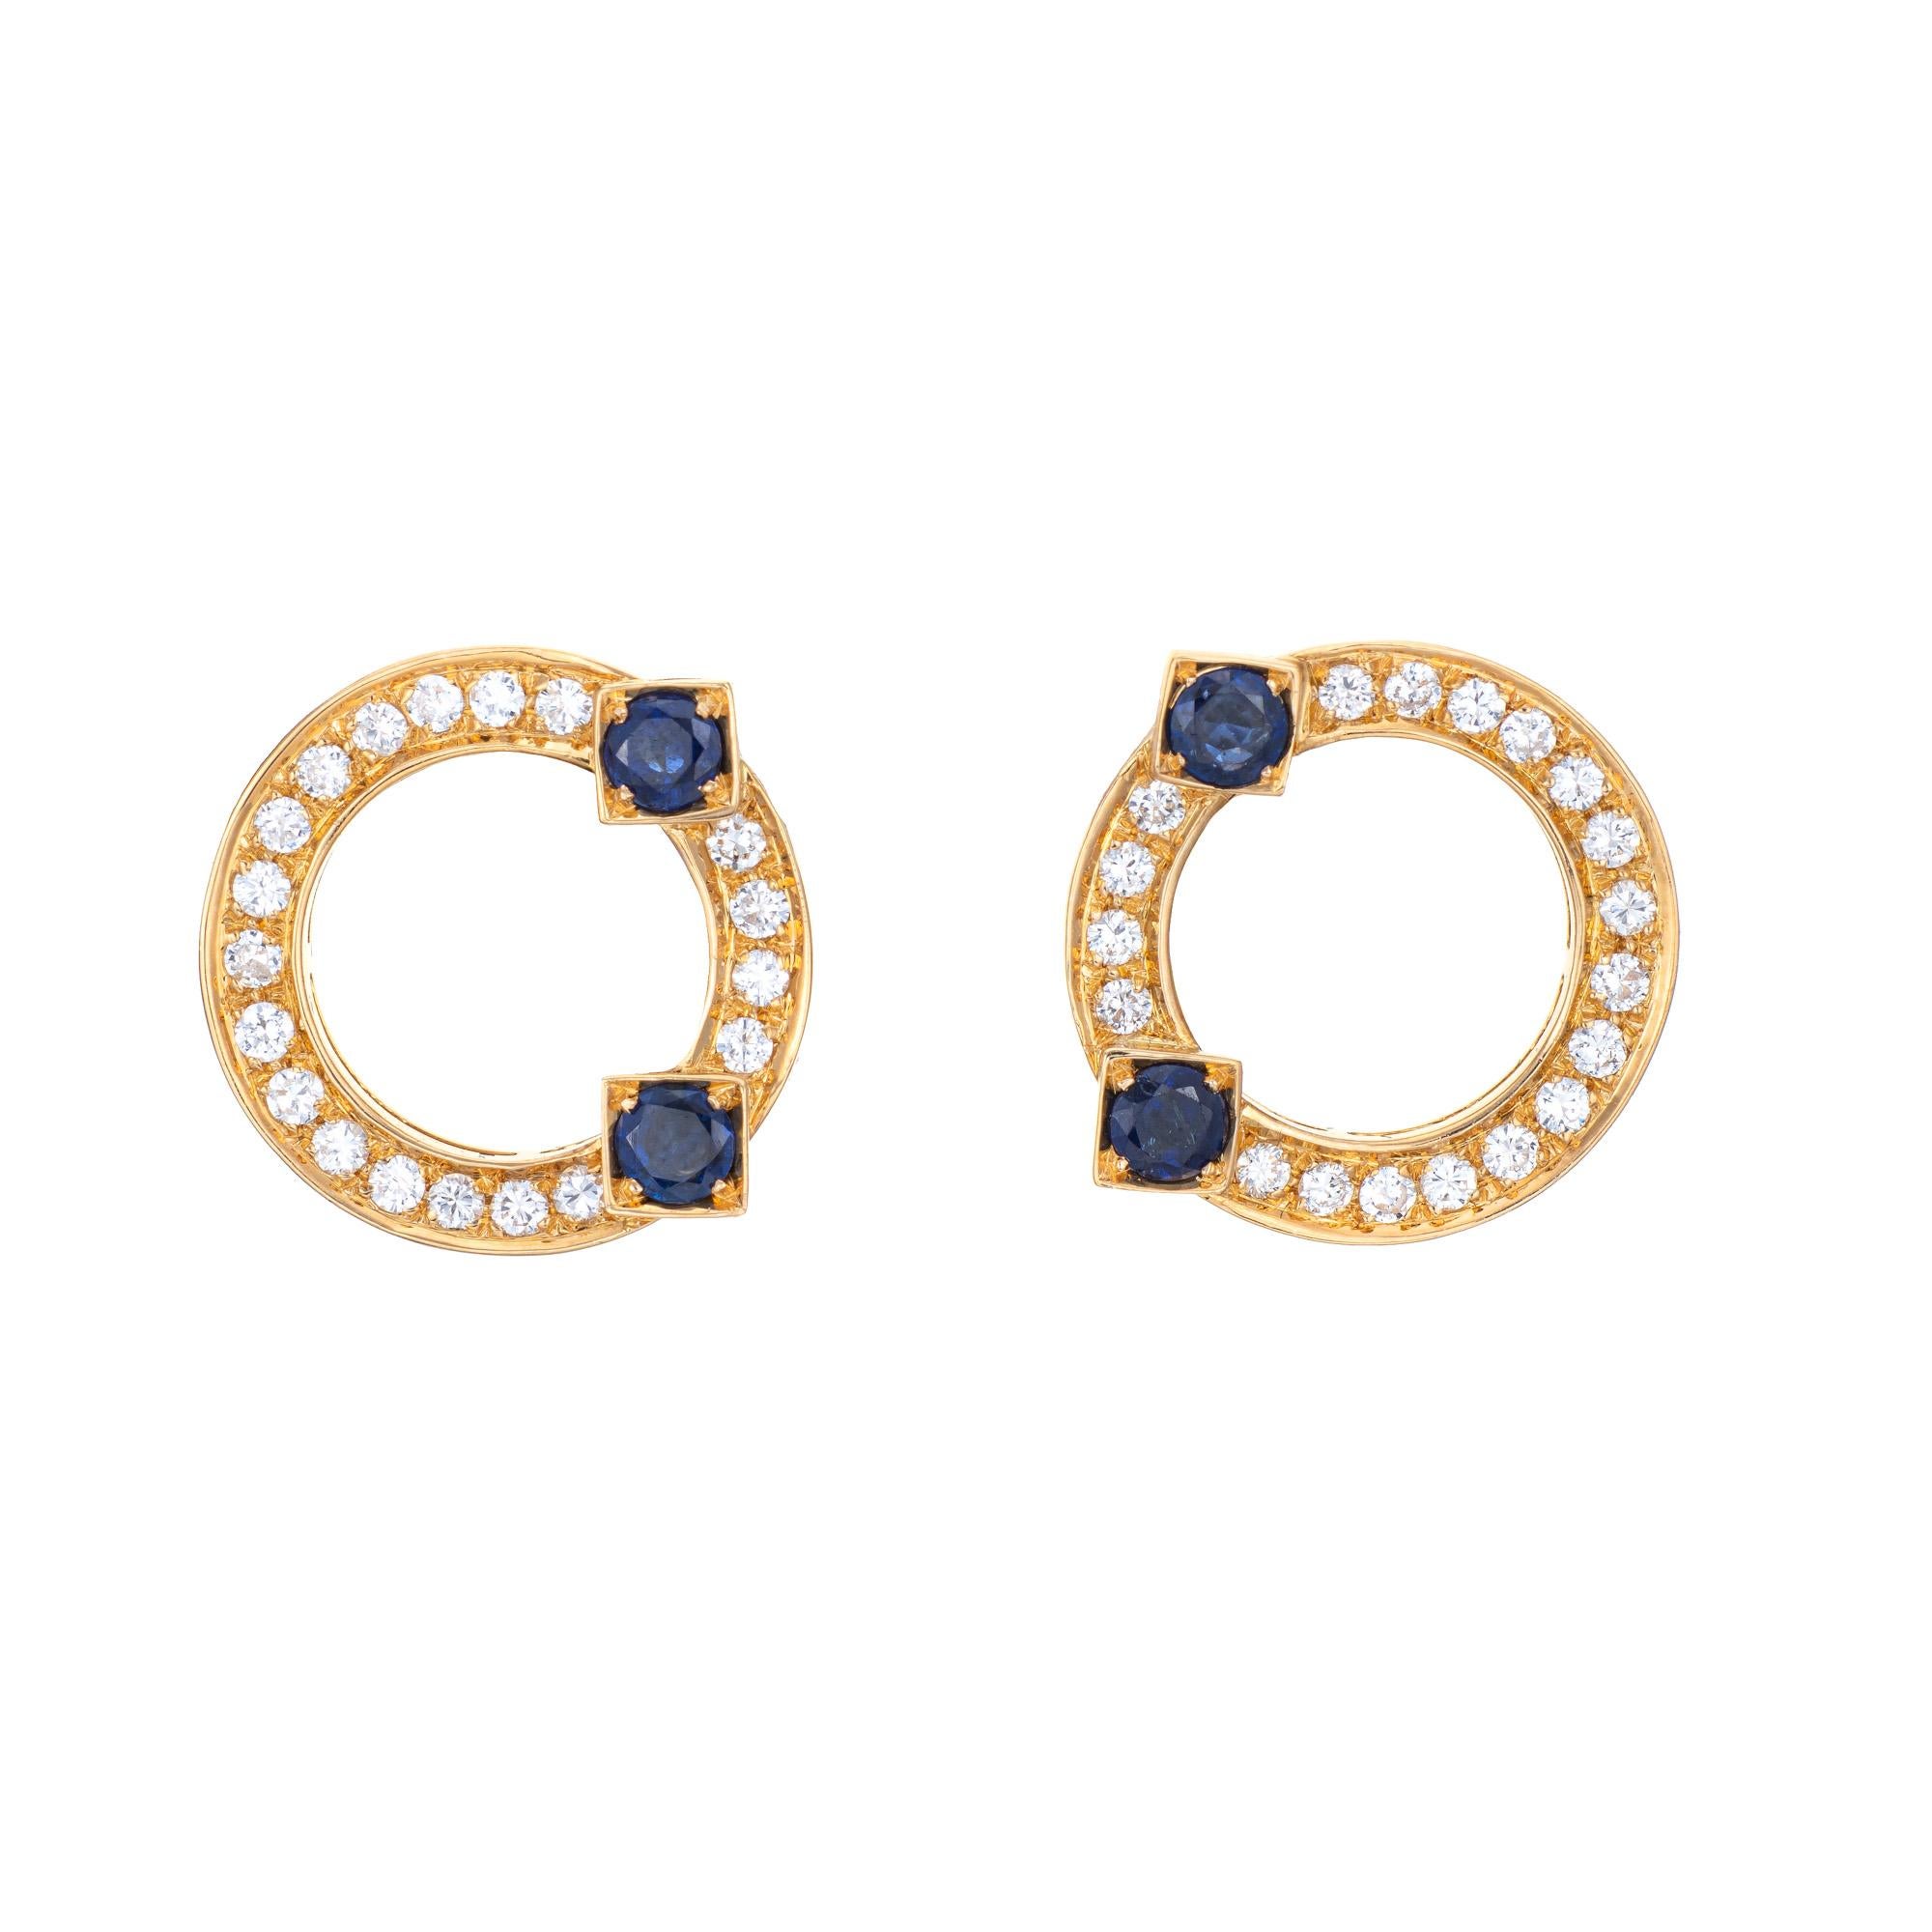 Round Cut Sapphire Diamond Earrings Vintage 18k Yellow Gold Circle Studs Fine Jewelry For Sale